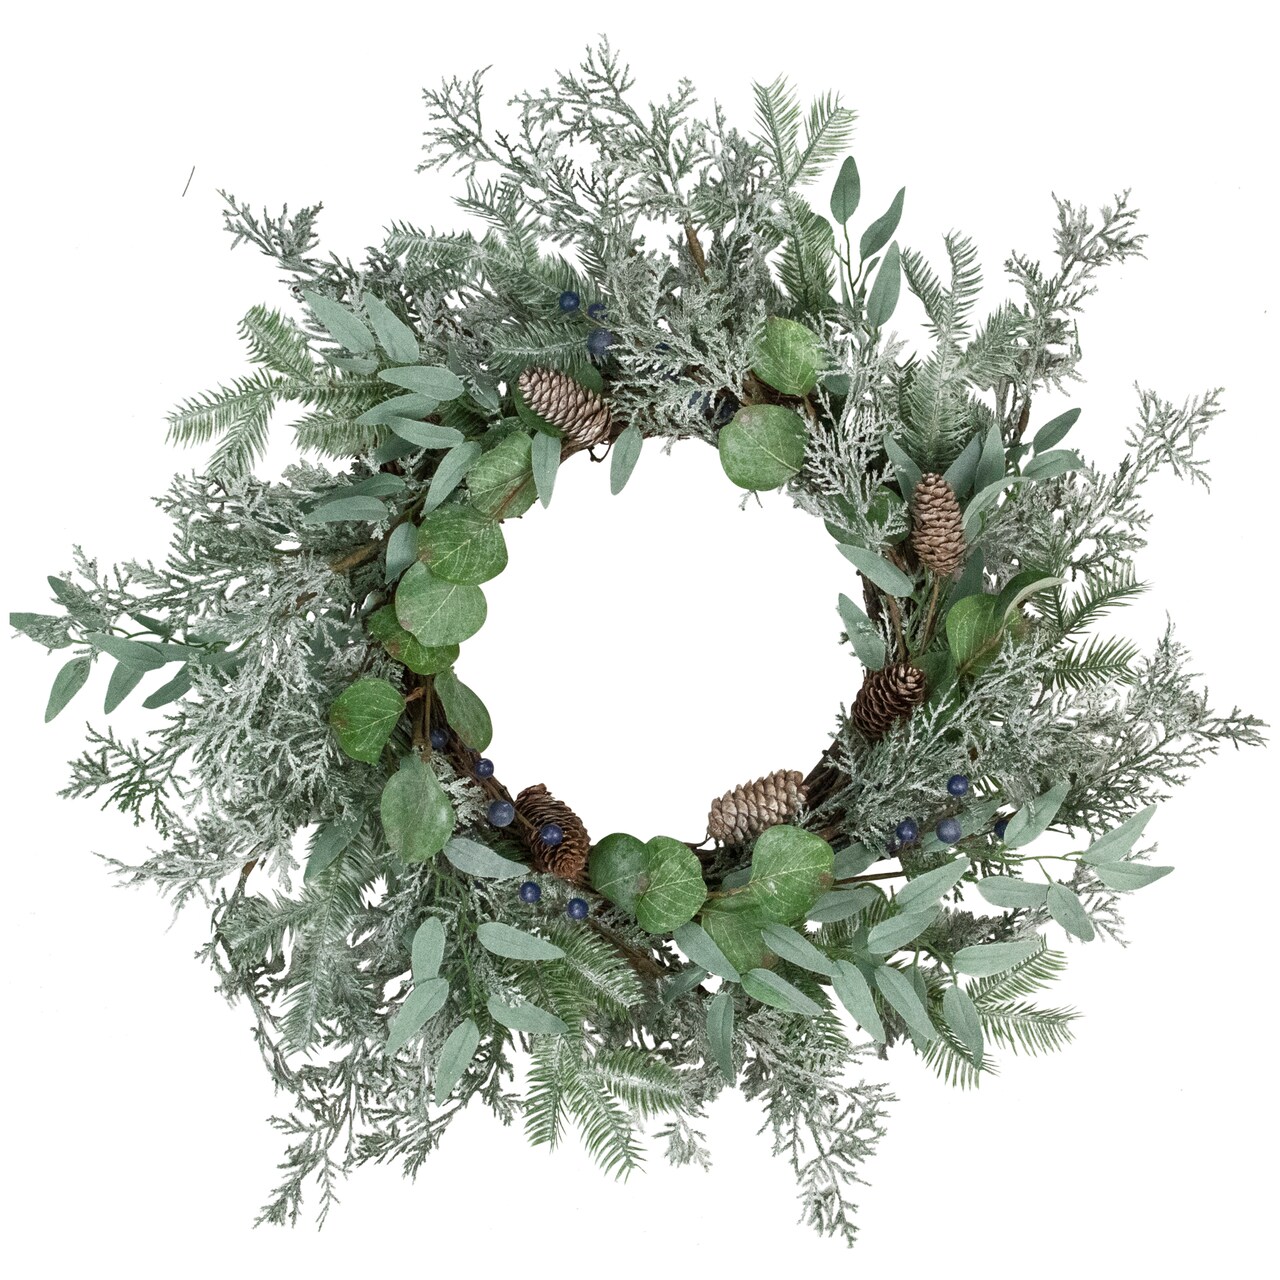 Northlight Frosted Green Mixed Foliage and Blueberries Artificial Christmas Wreath, 26-Inch, Unlit